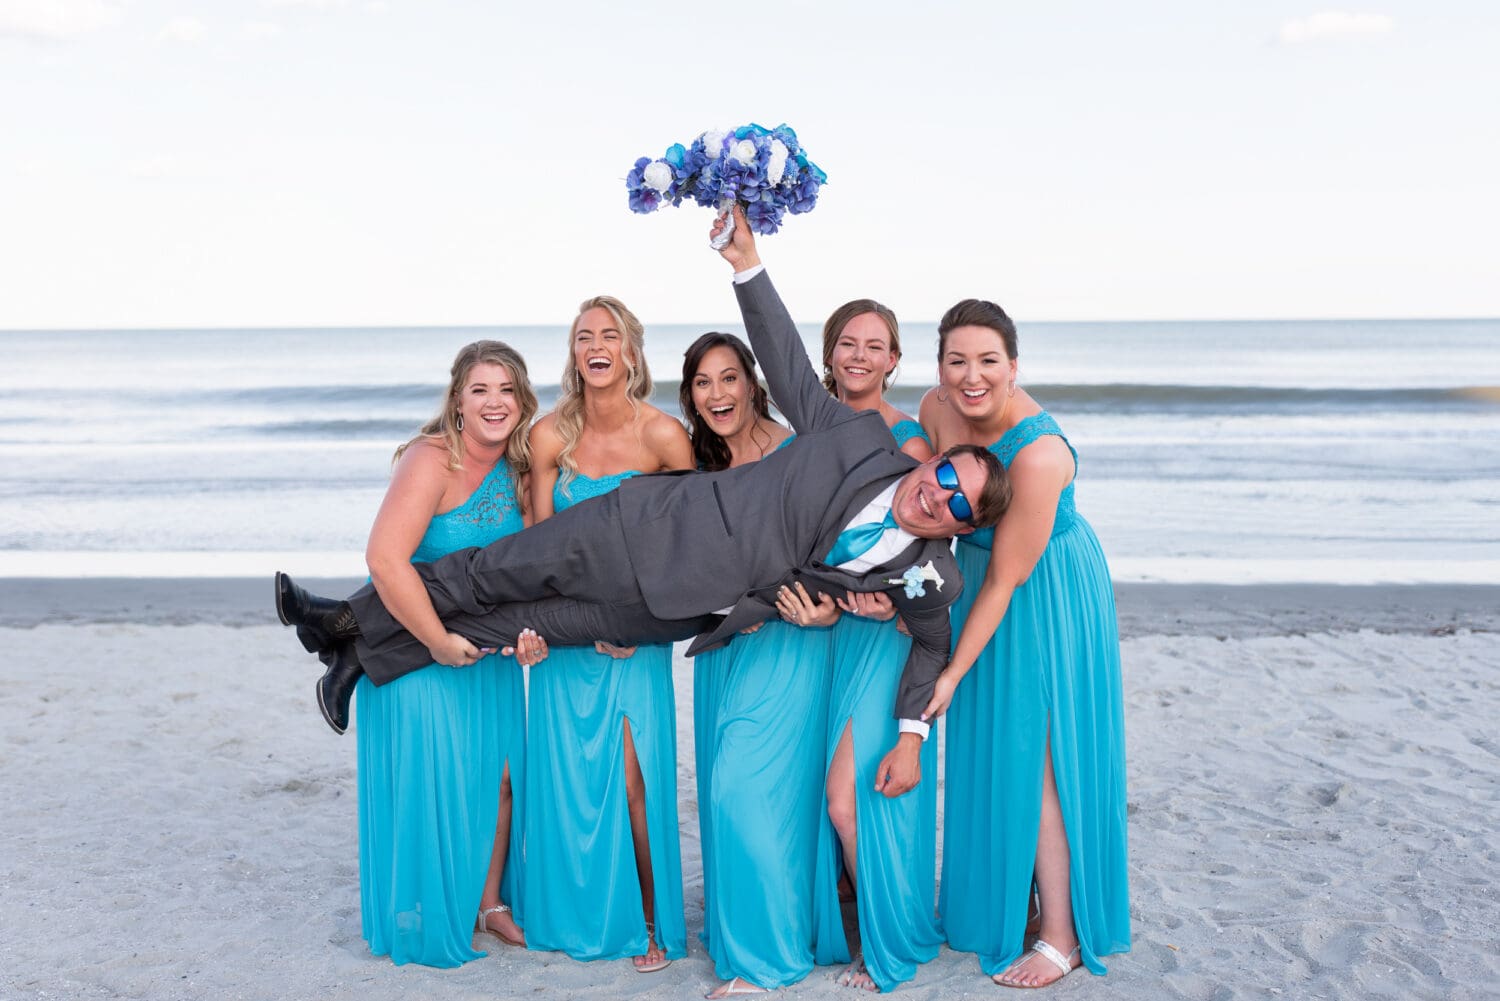 Fun picture with the bridesmaids holding up the groom by the ocean - Grande Dunes Ocean Club